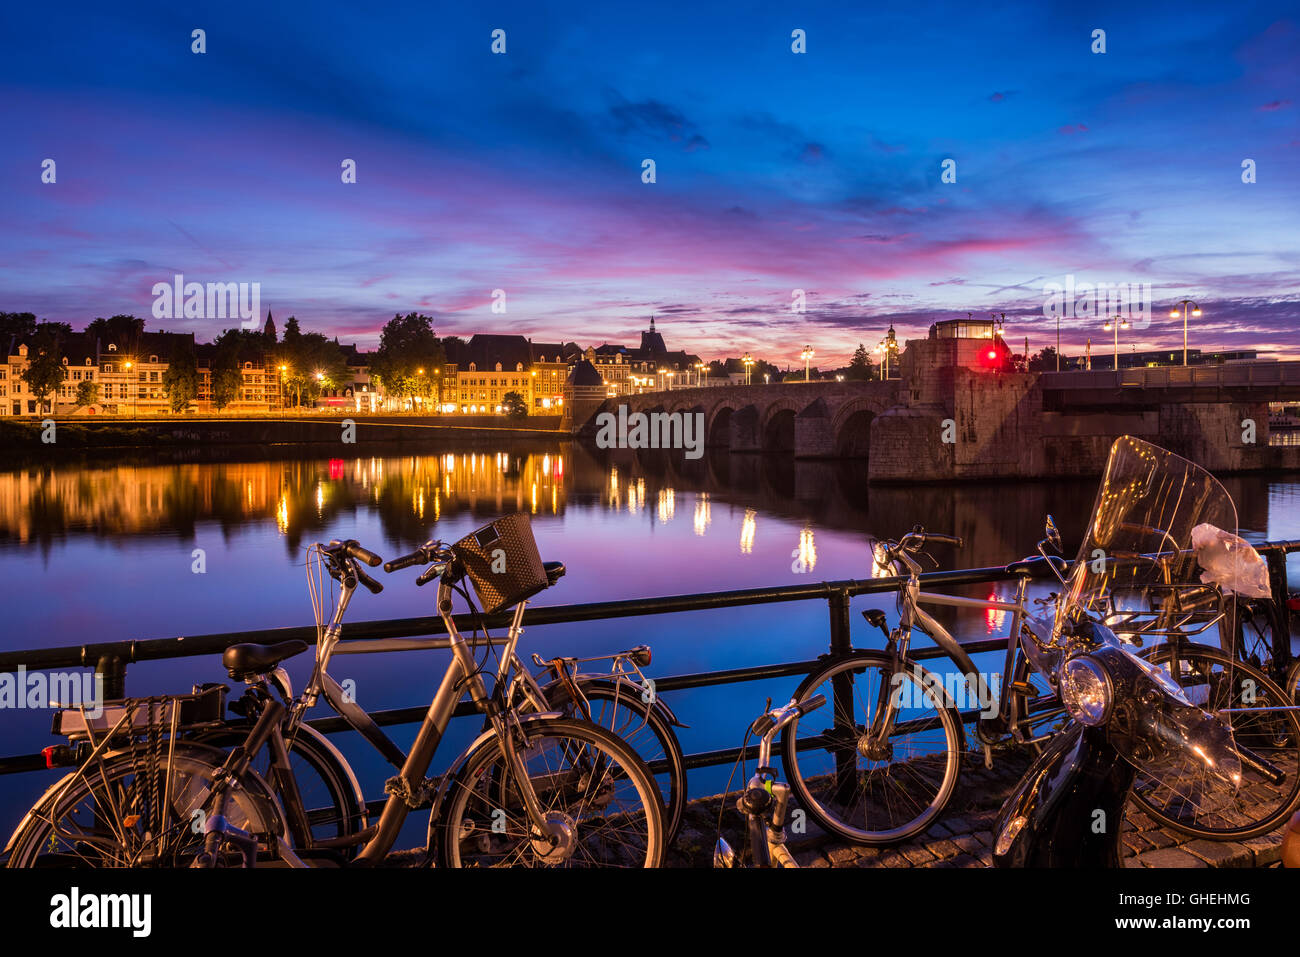 Bicycles at River Maas in Maastricht Netherlands Stock Photo